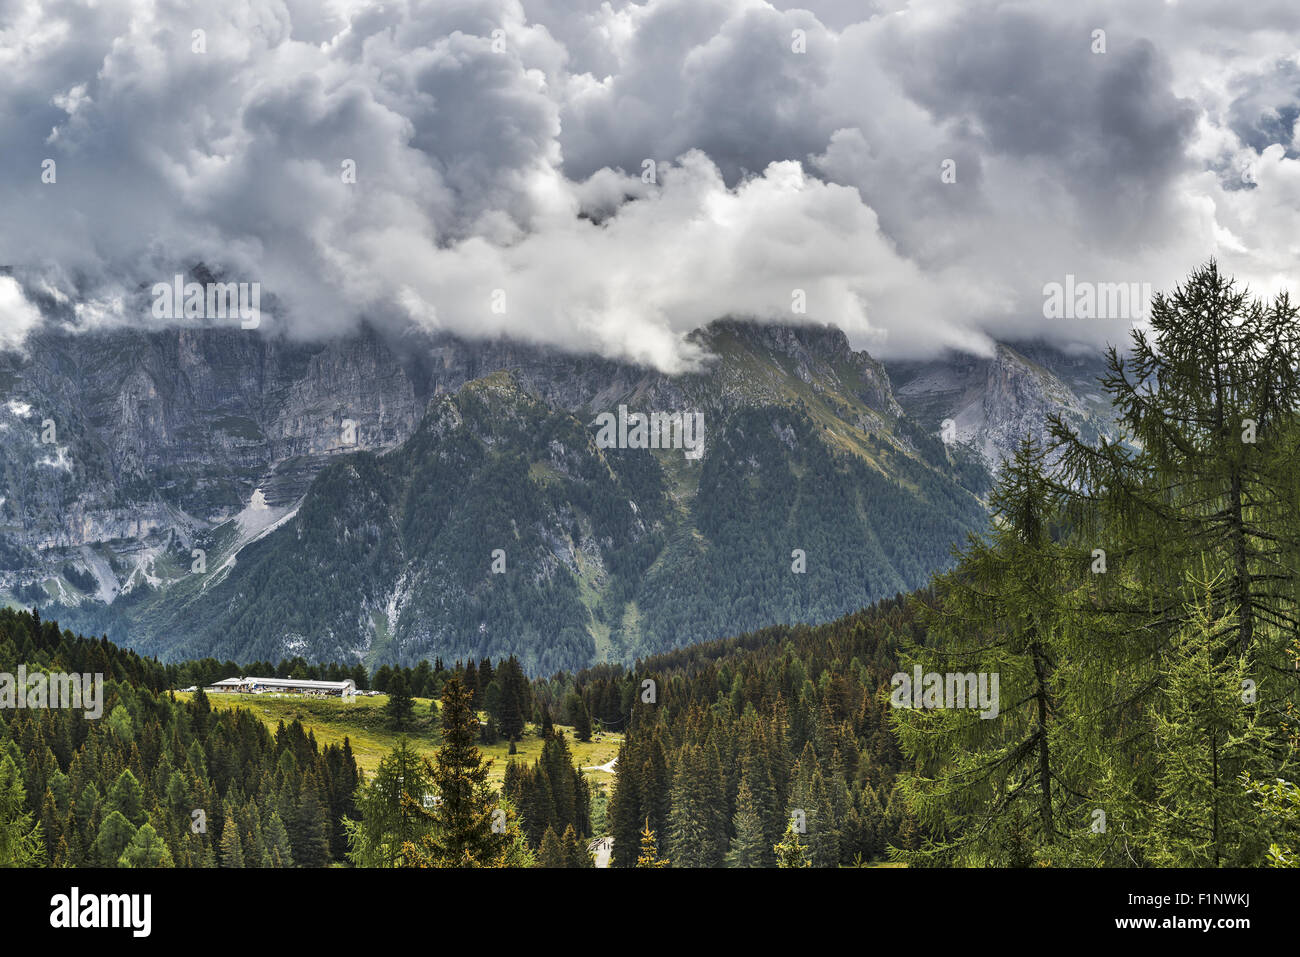 Landscape on the forest, mountains and clouds of Dolomiti di Brenta, Trentino - Italy Stock Photo